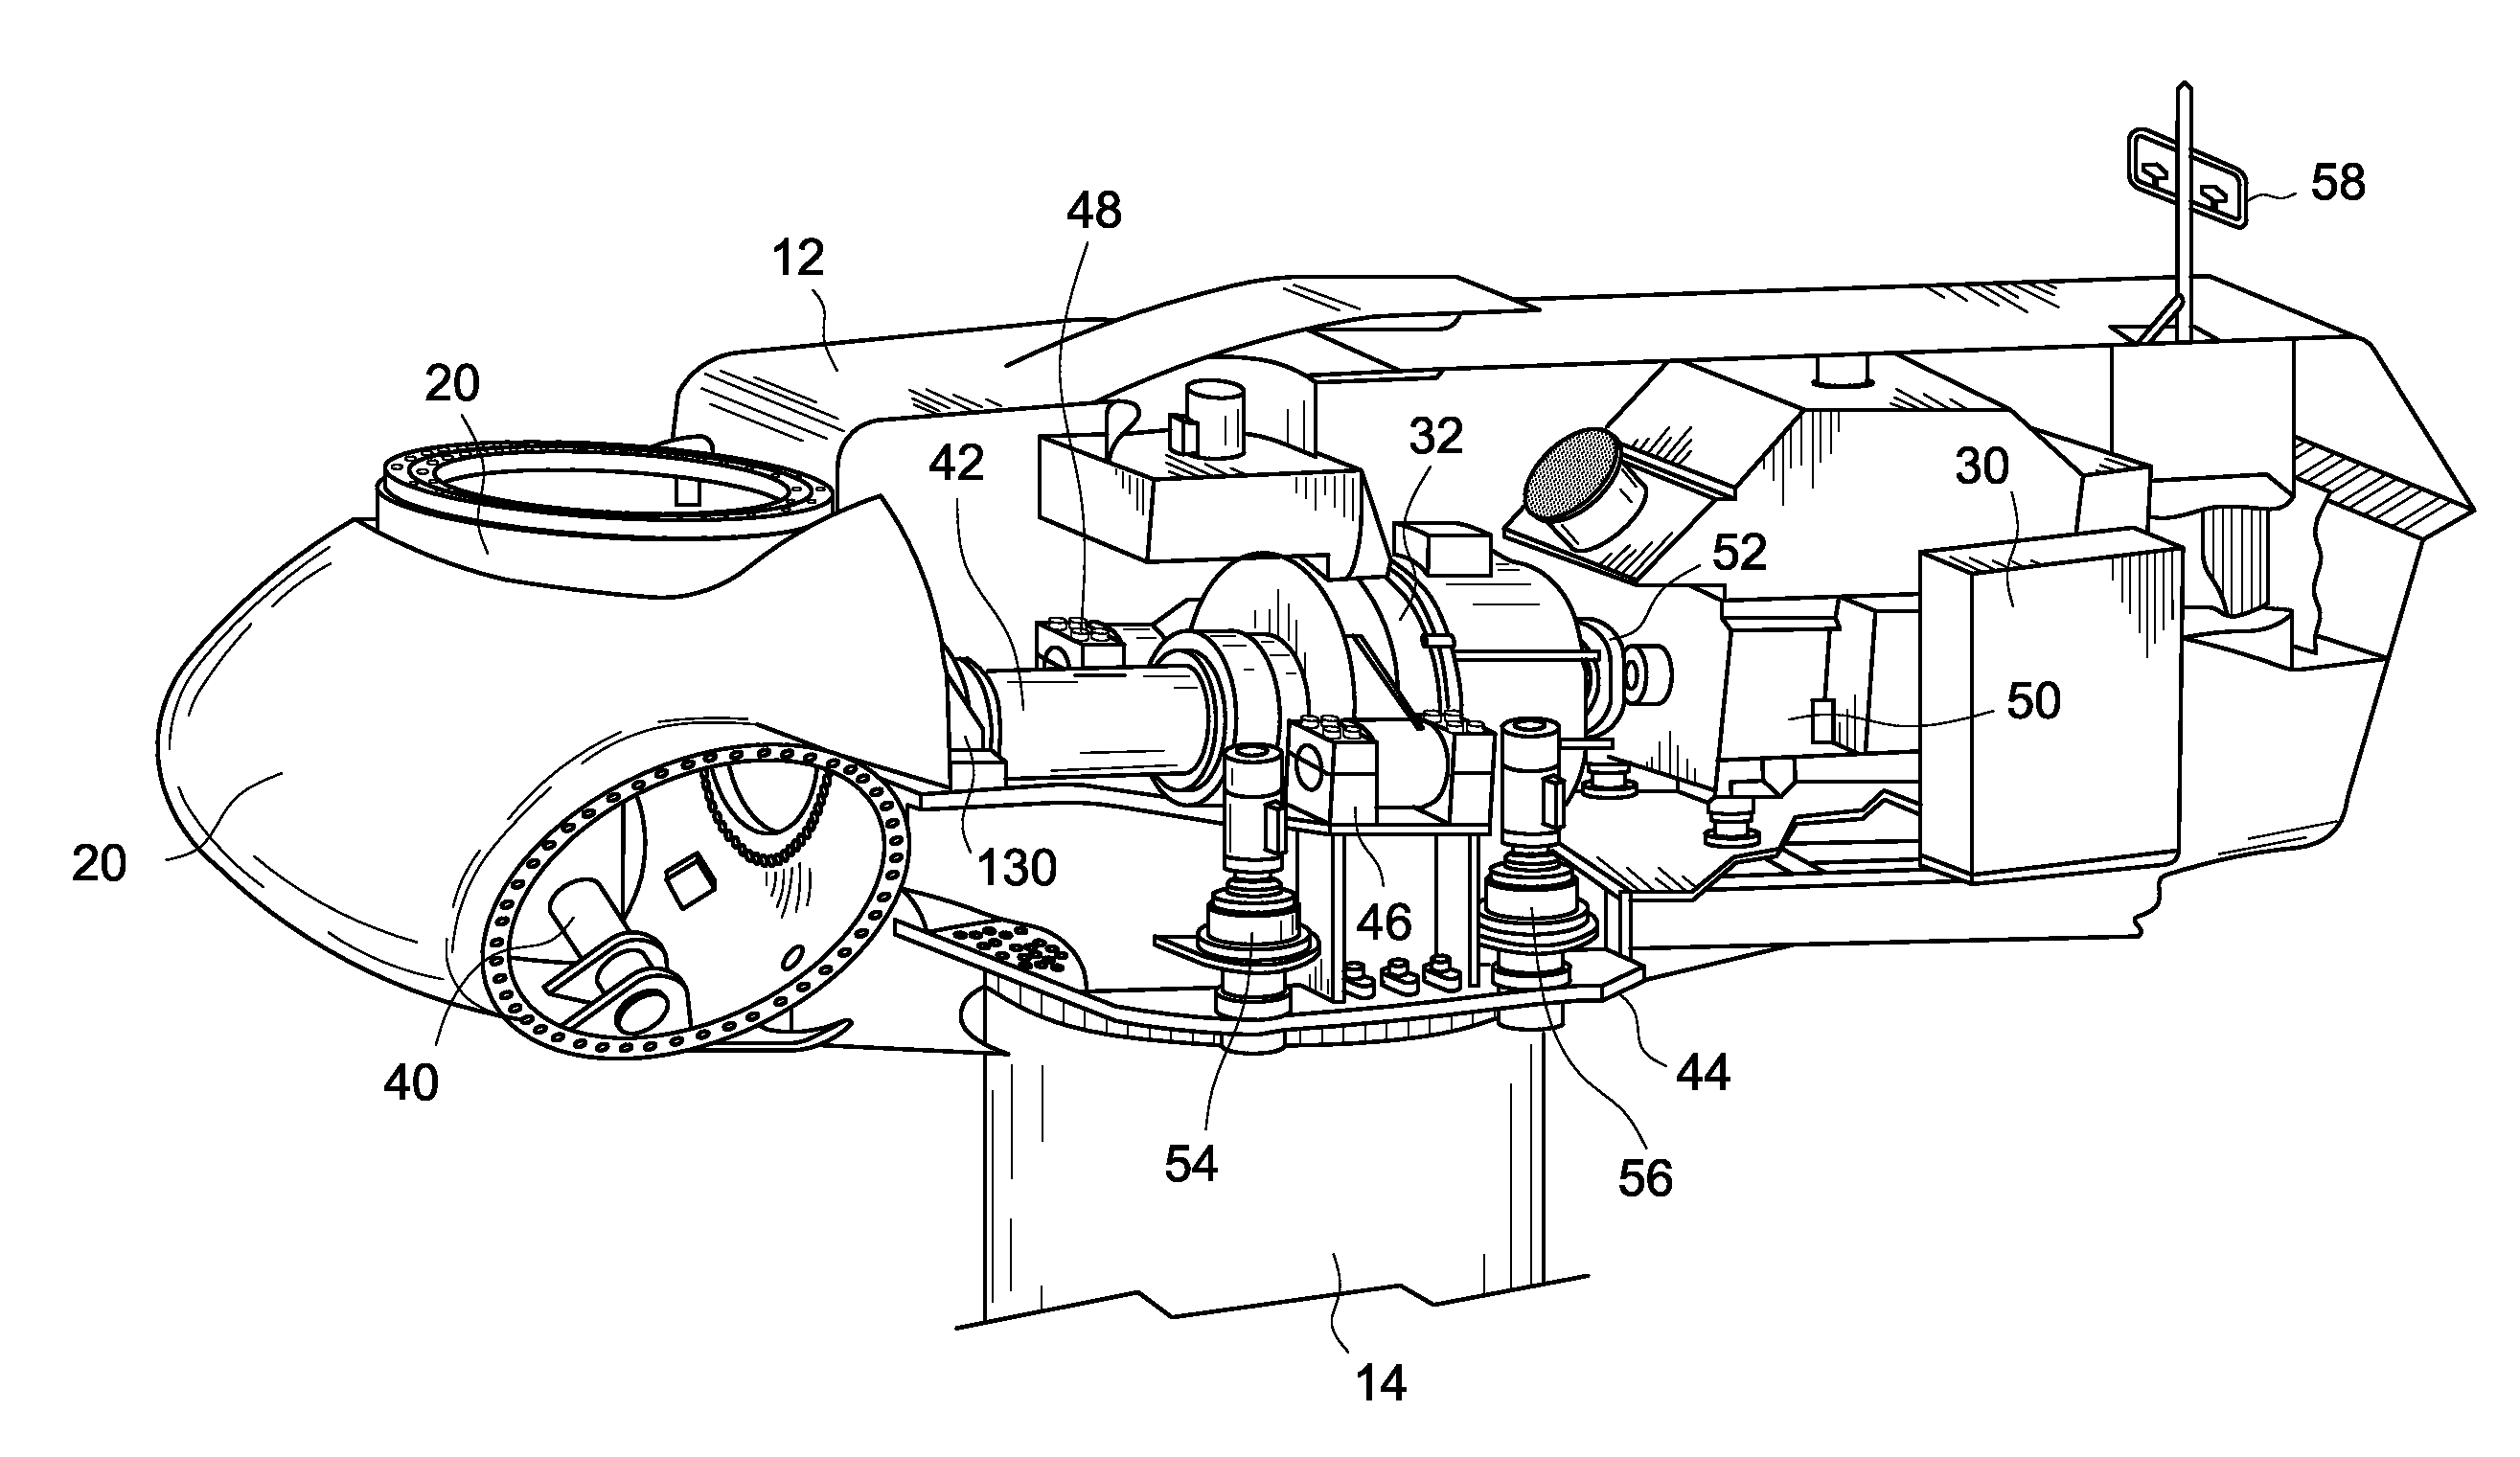 System and method for monitoring wind turbine gearbox health and performance